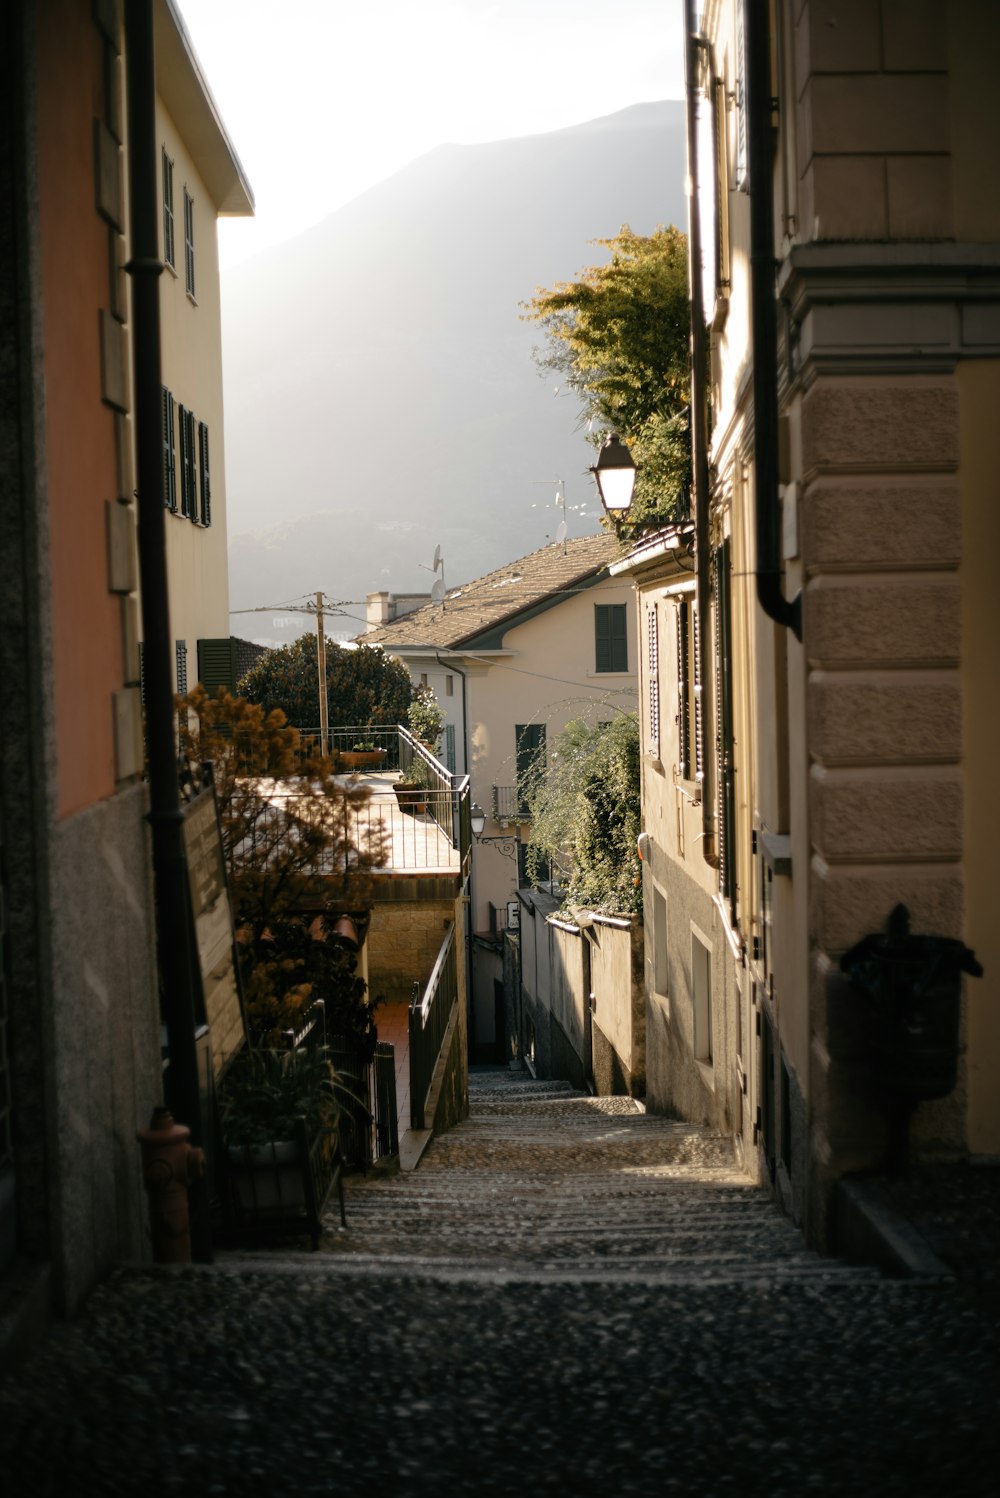 a narrow alley way with a lamp on the side